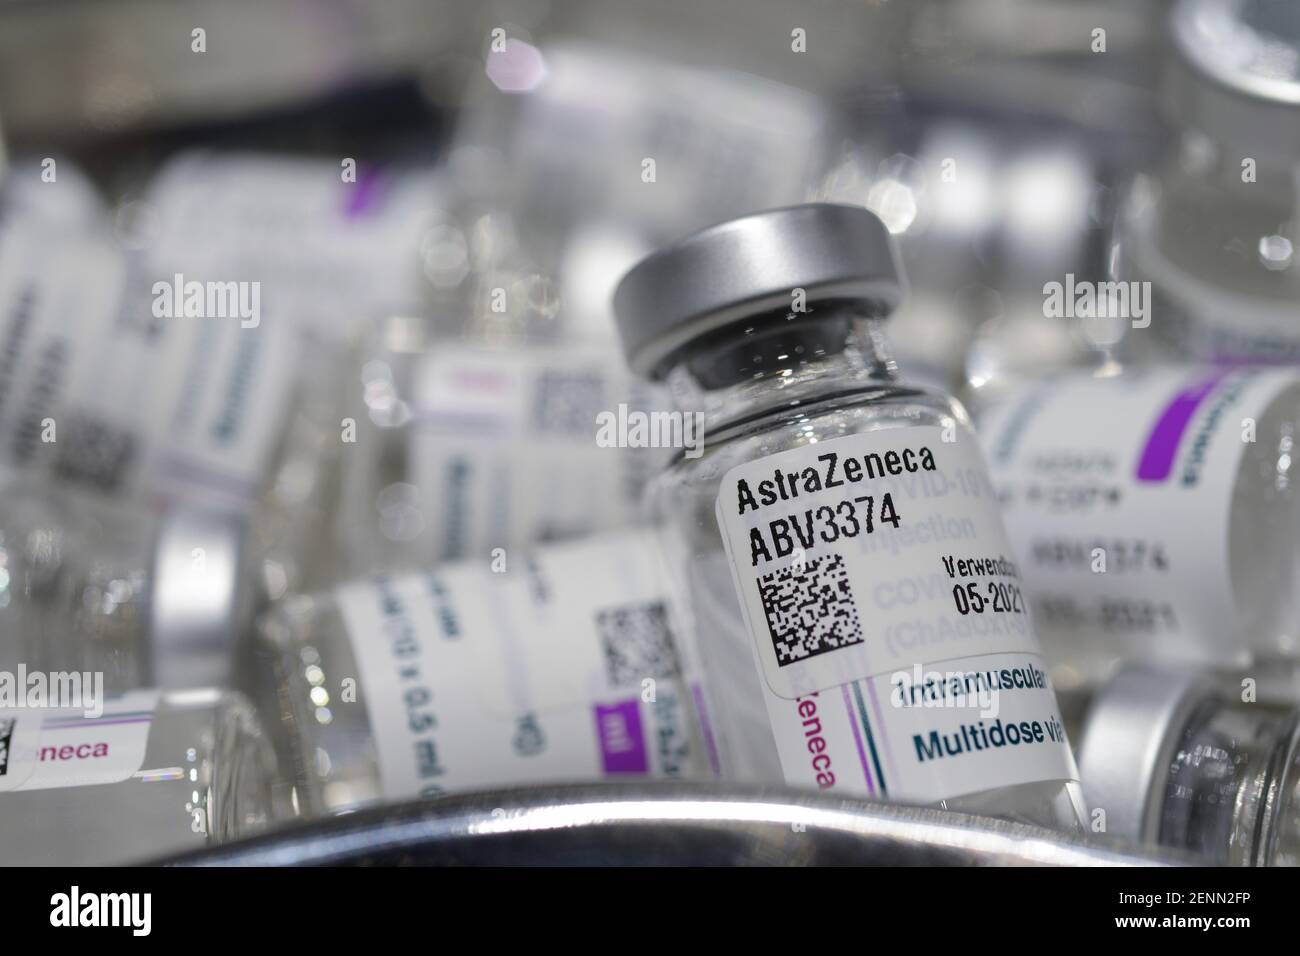 GERMANY, Hamburg, corona pandemic, largest vaccination center in Germany, for daily max 7000 people, preparation of vaccine for vaccination with syringe, empty glass vials of british swedish company AstraZeneca against corona virus Covid-19 Stock Photo